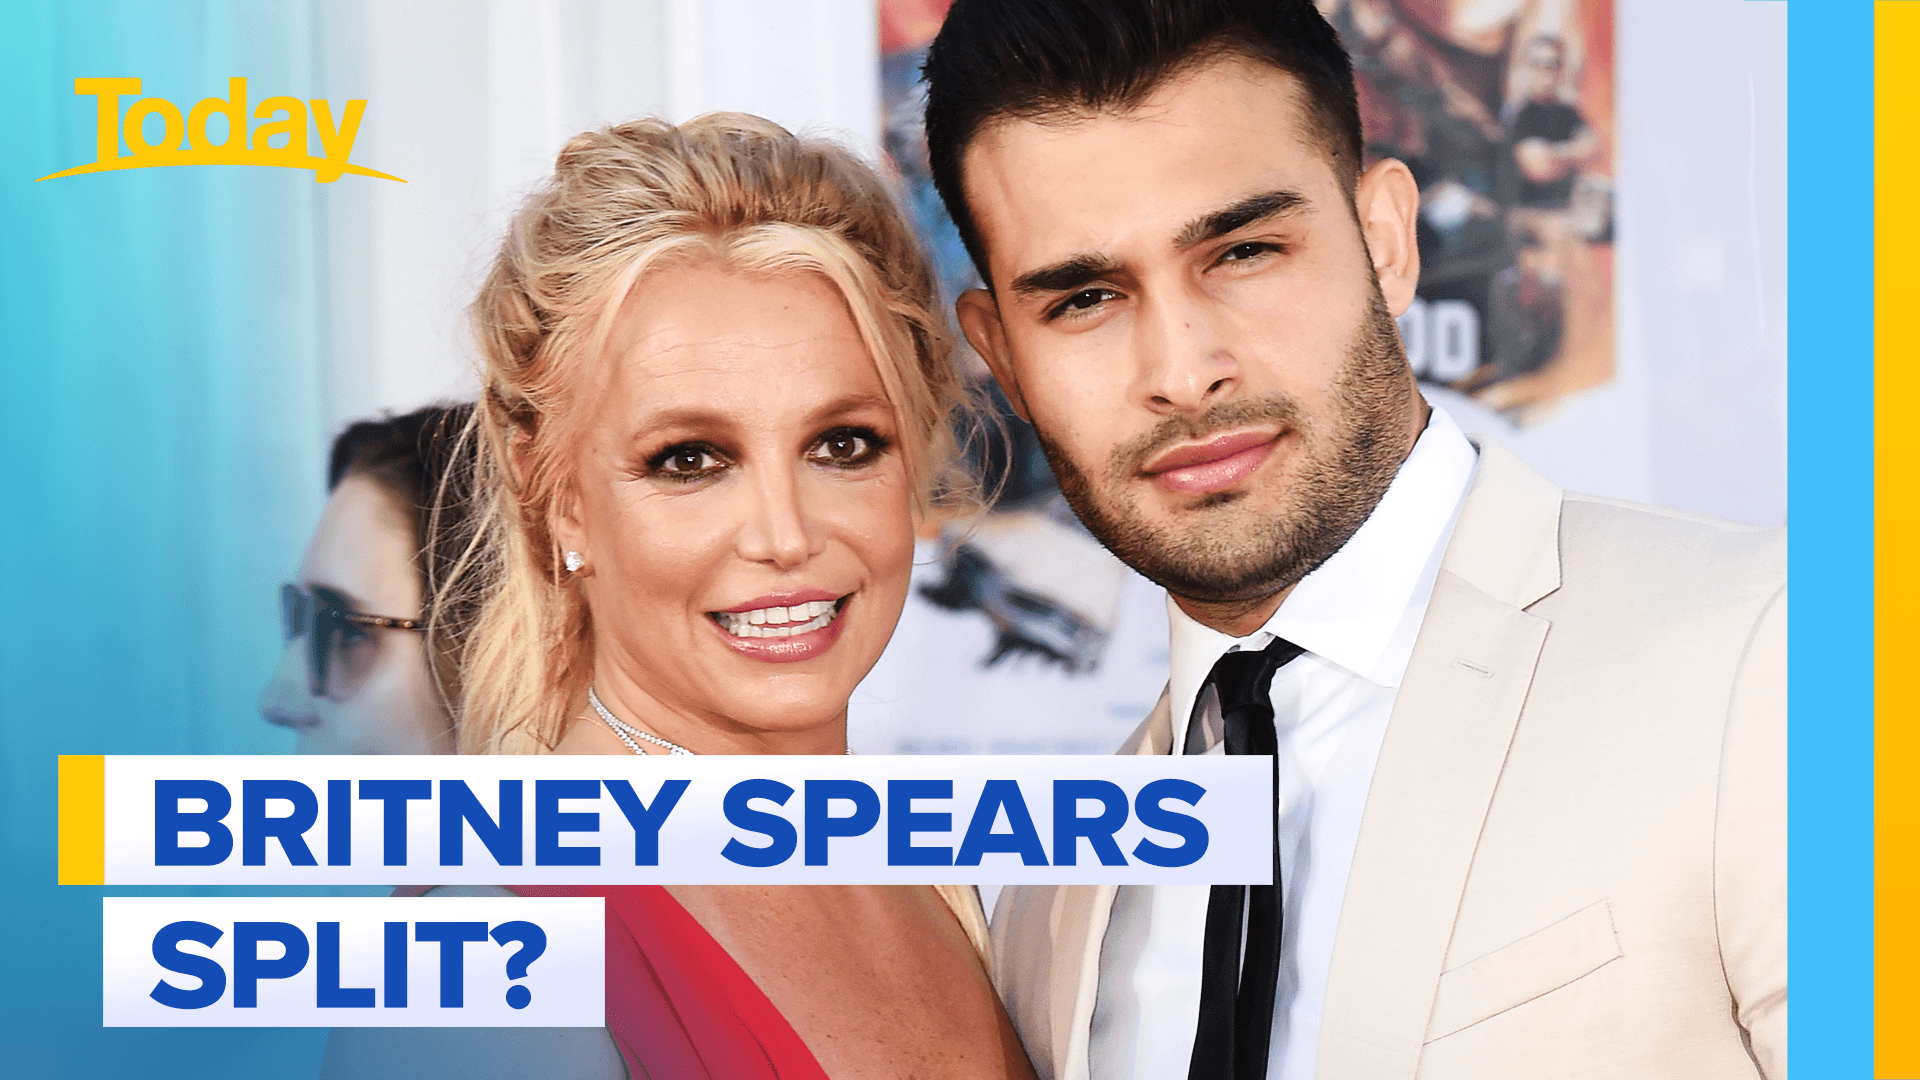 Britney Spears reportedly splits from husband